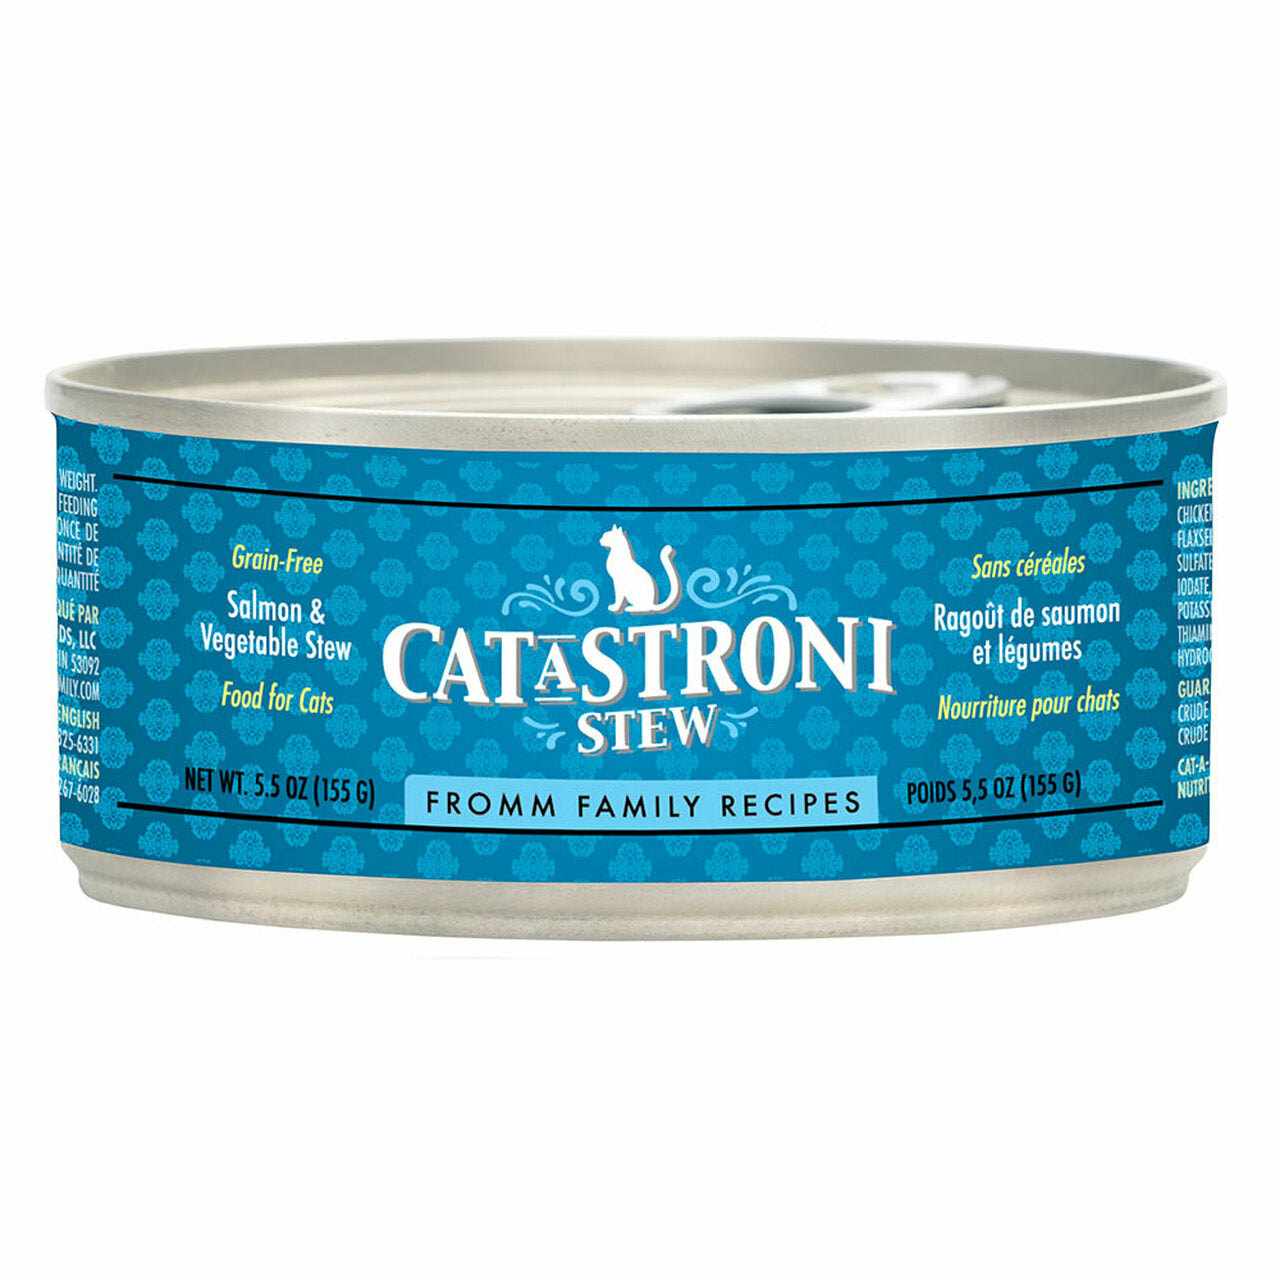 Fromm Catastroni Salmon & Vegetable